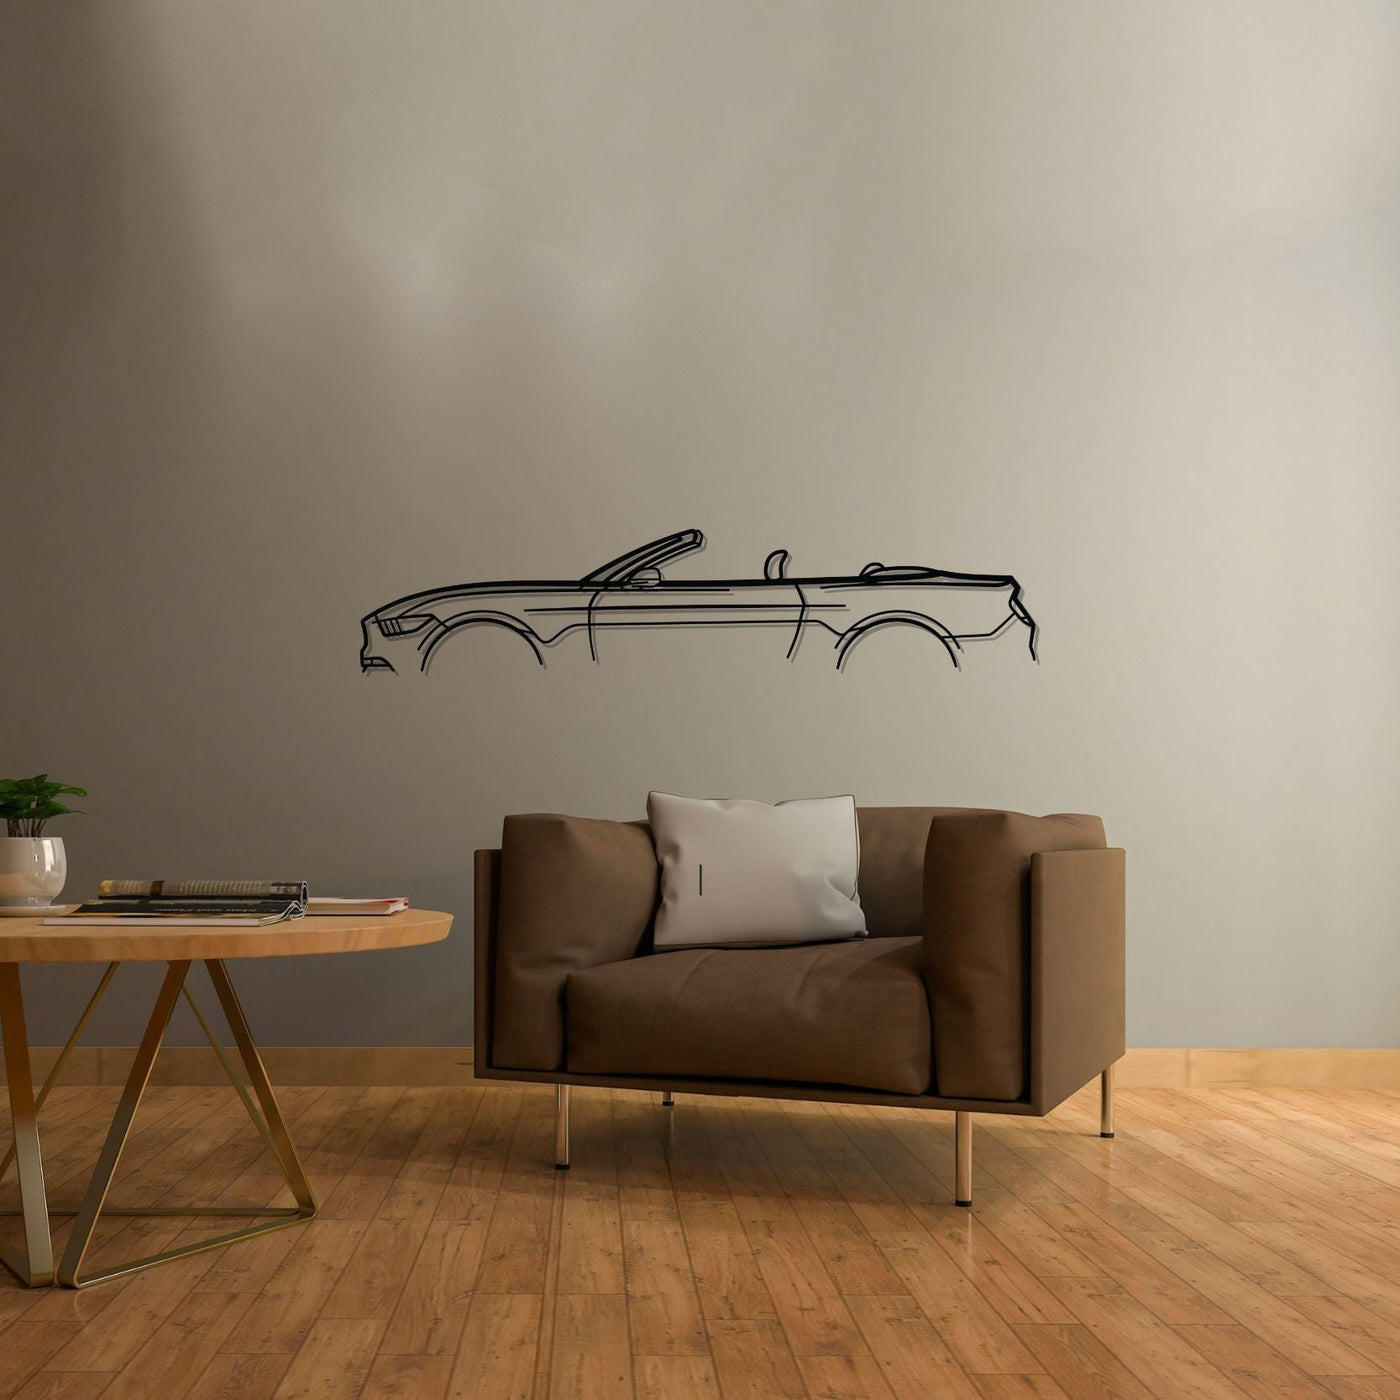 Mustang GT S550 Convertible Classic Silhouette Metal Wall Art